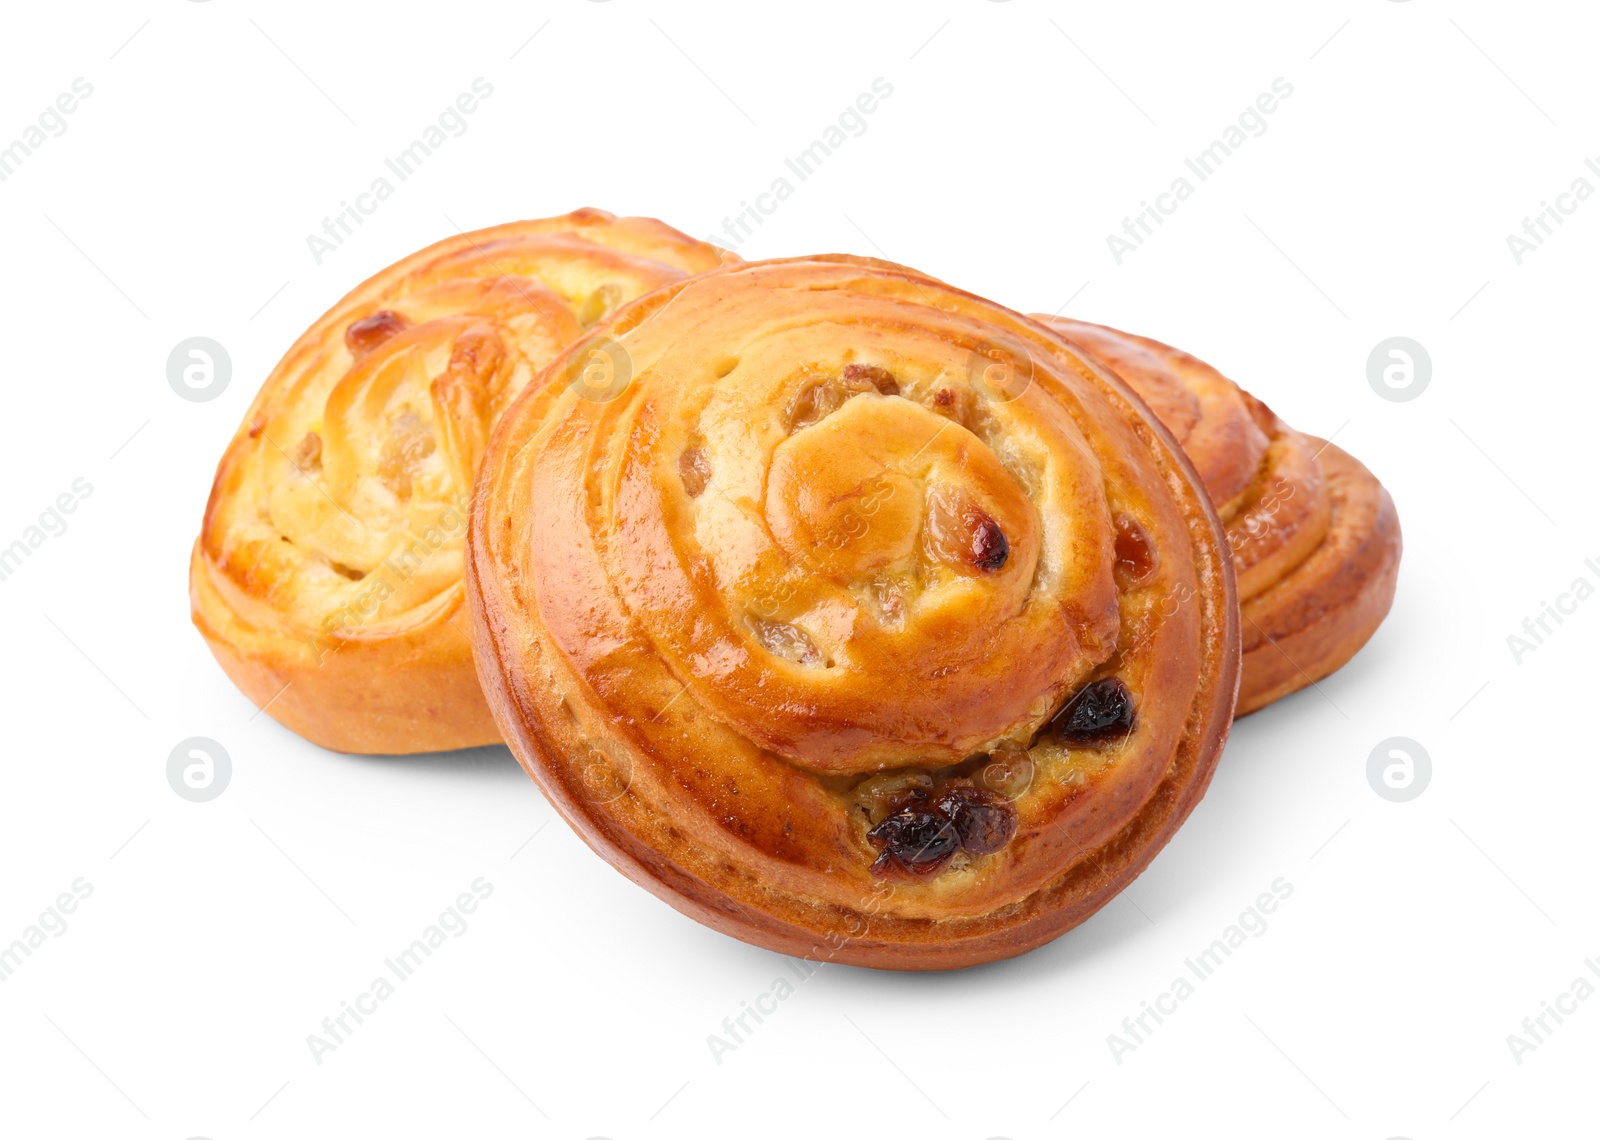 Photo of Delicious rolls with raisins isolated on white. Sweet buns